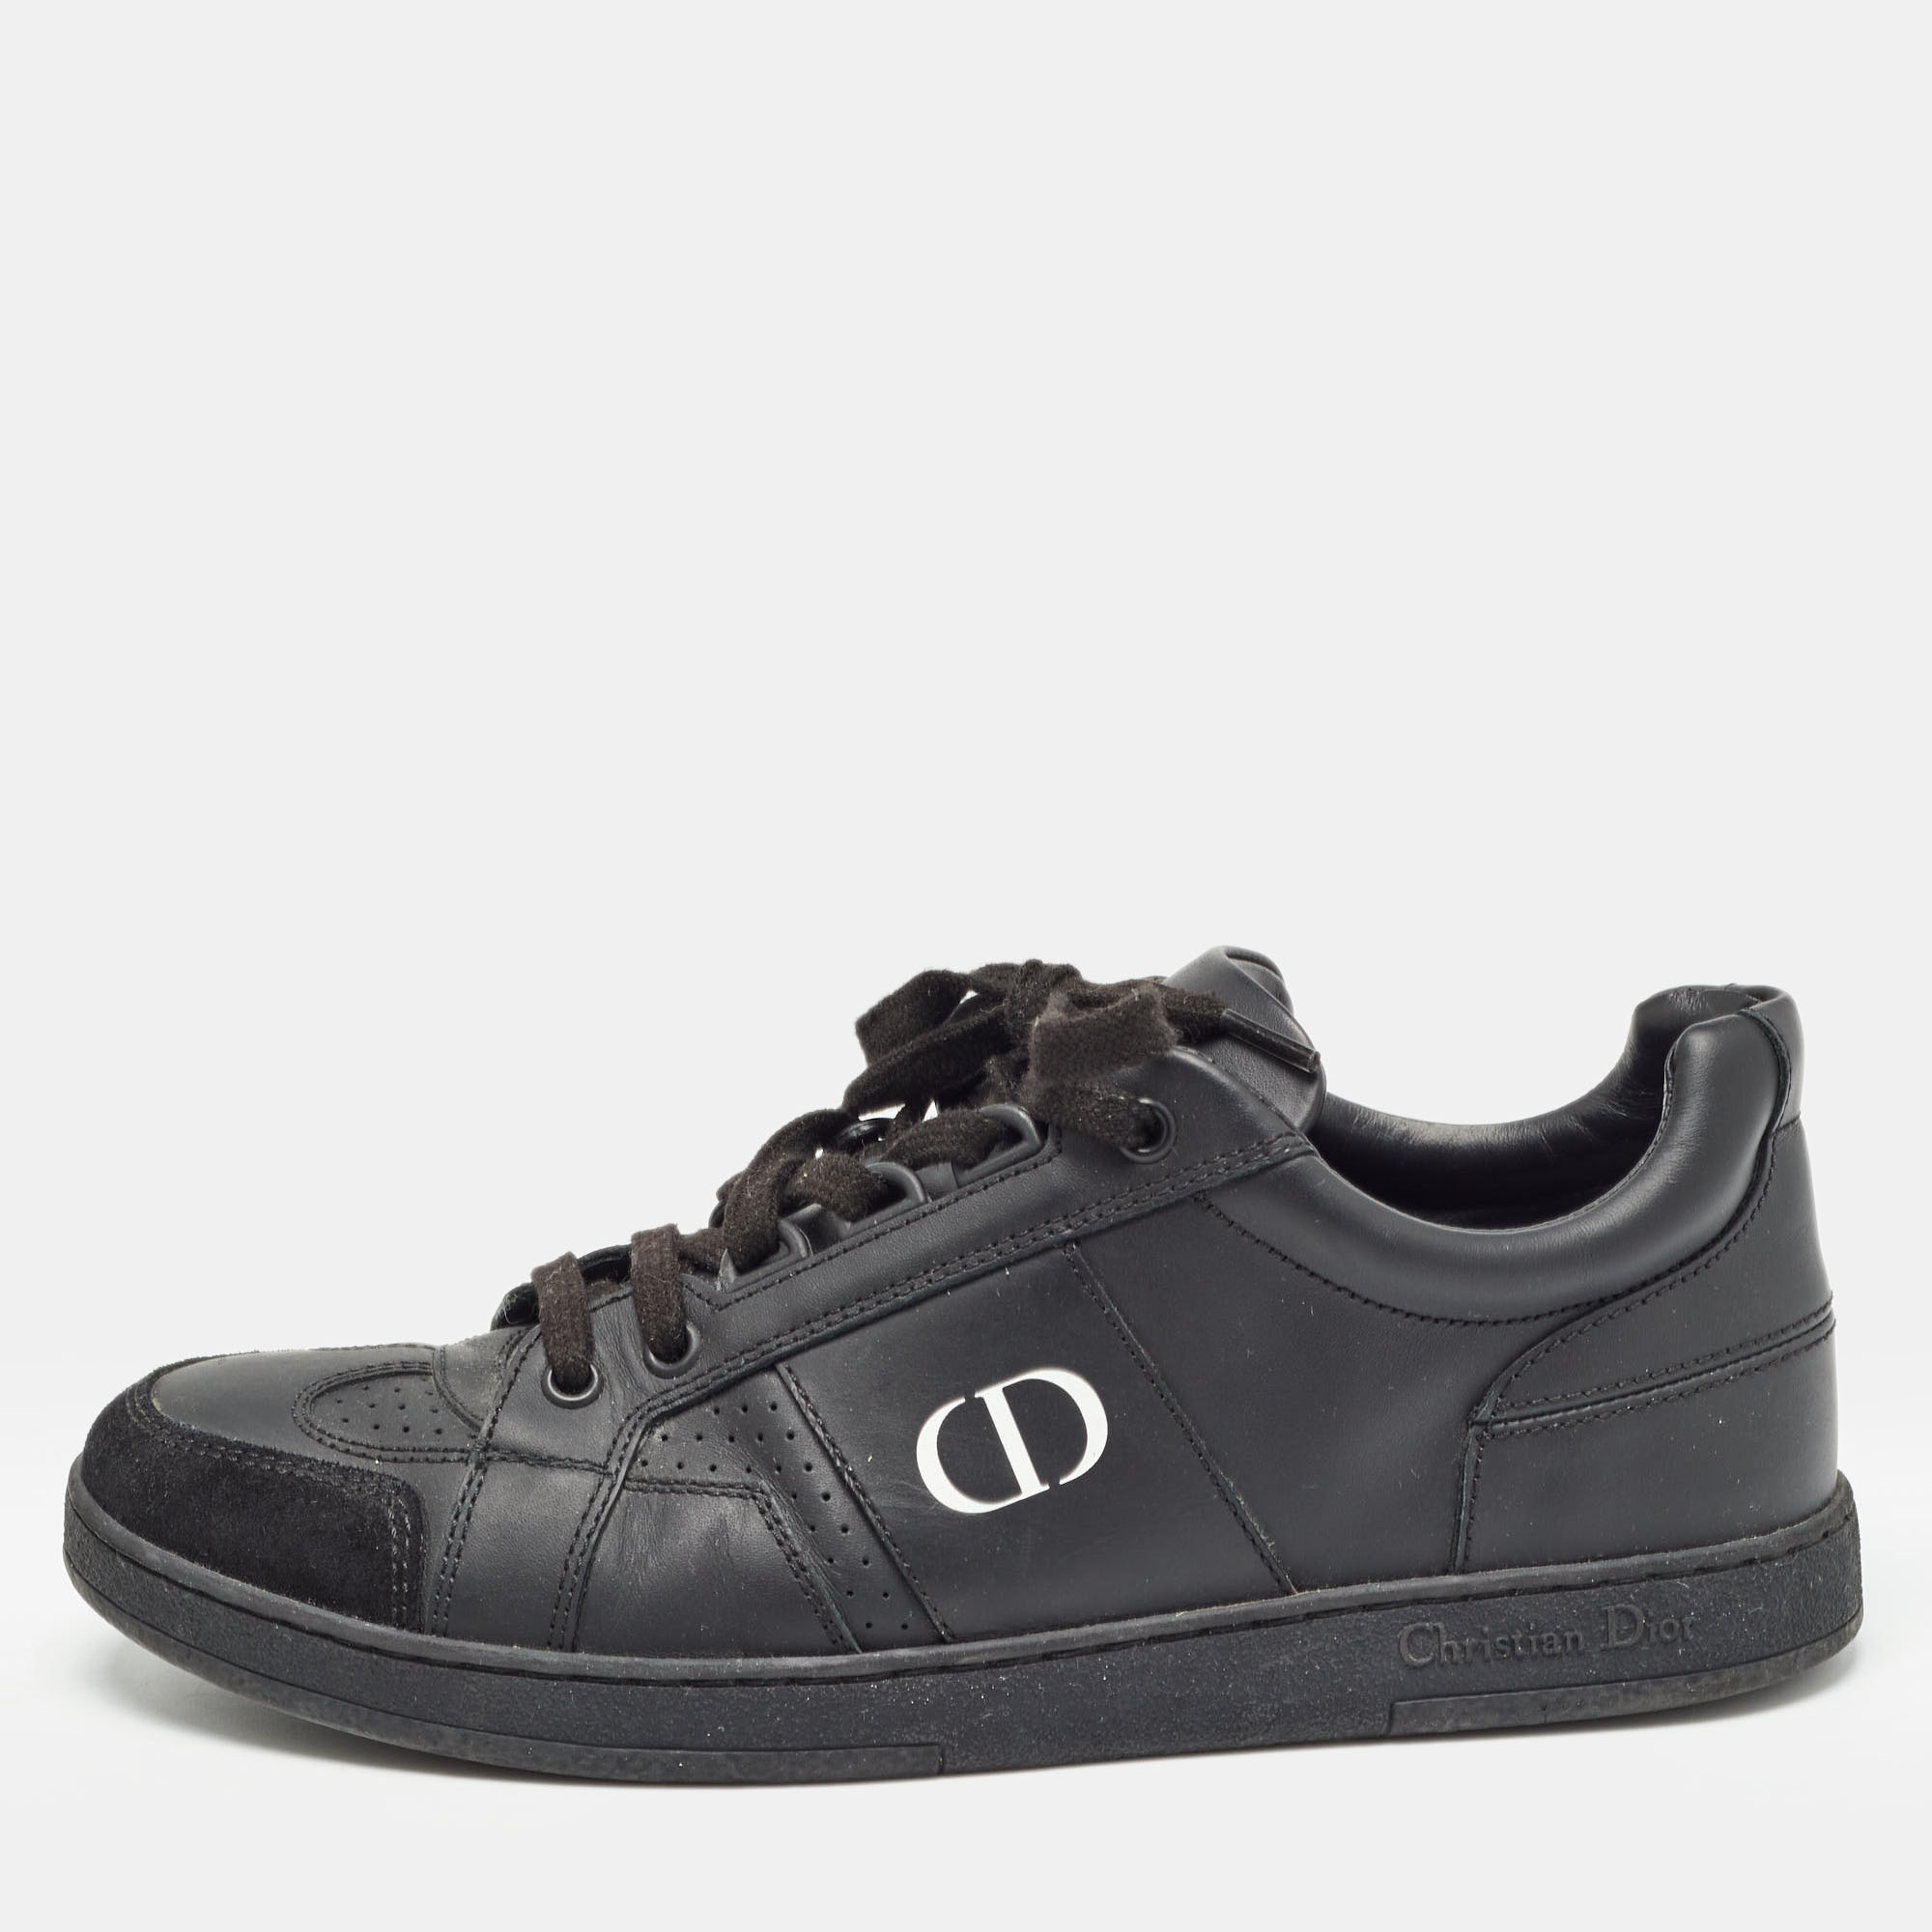 Dior black leather low top sneakers size 37